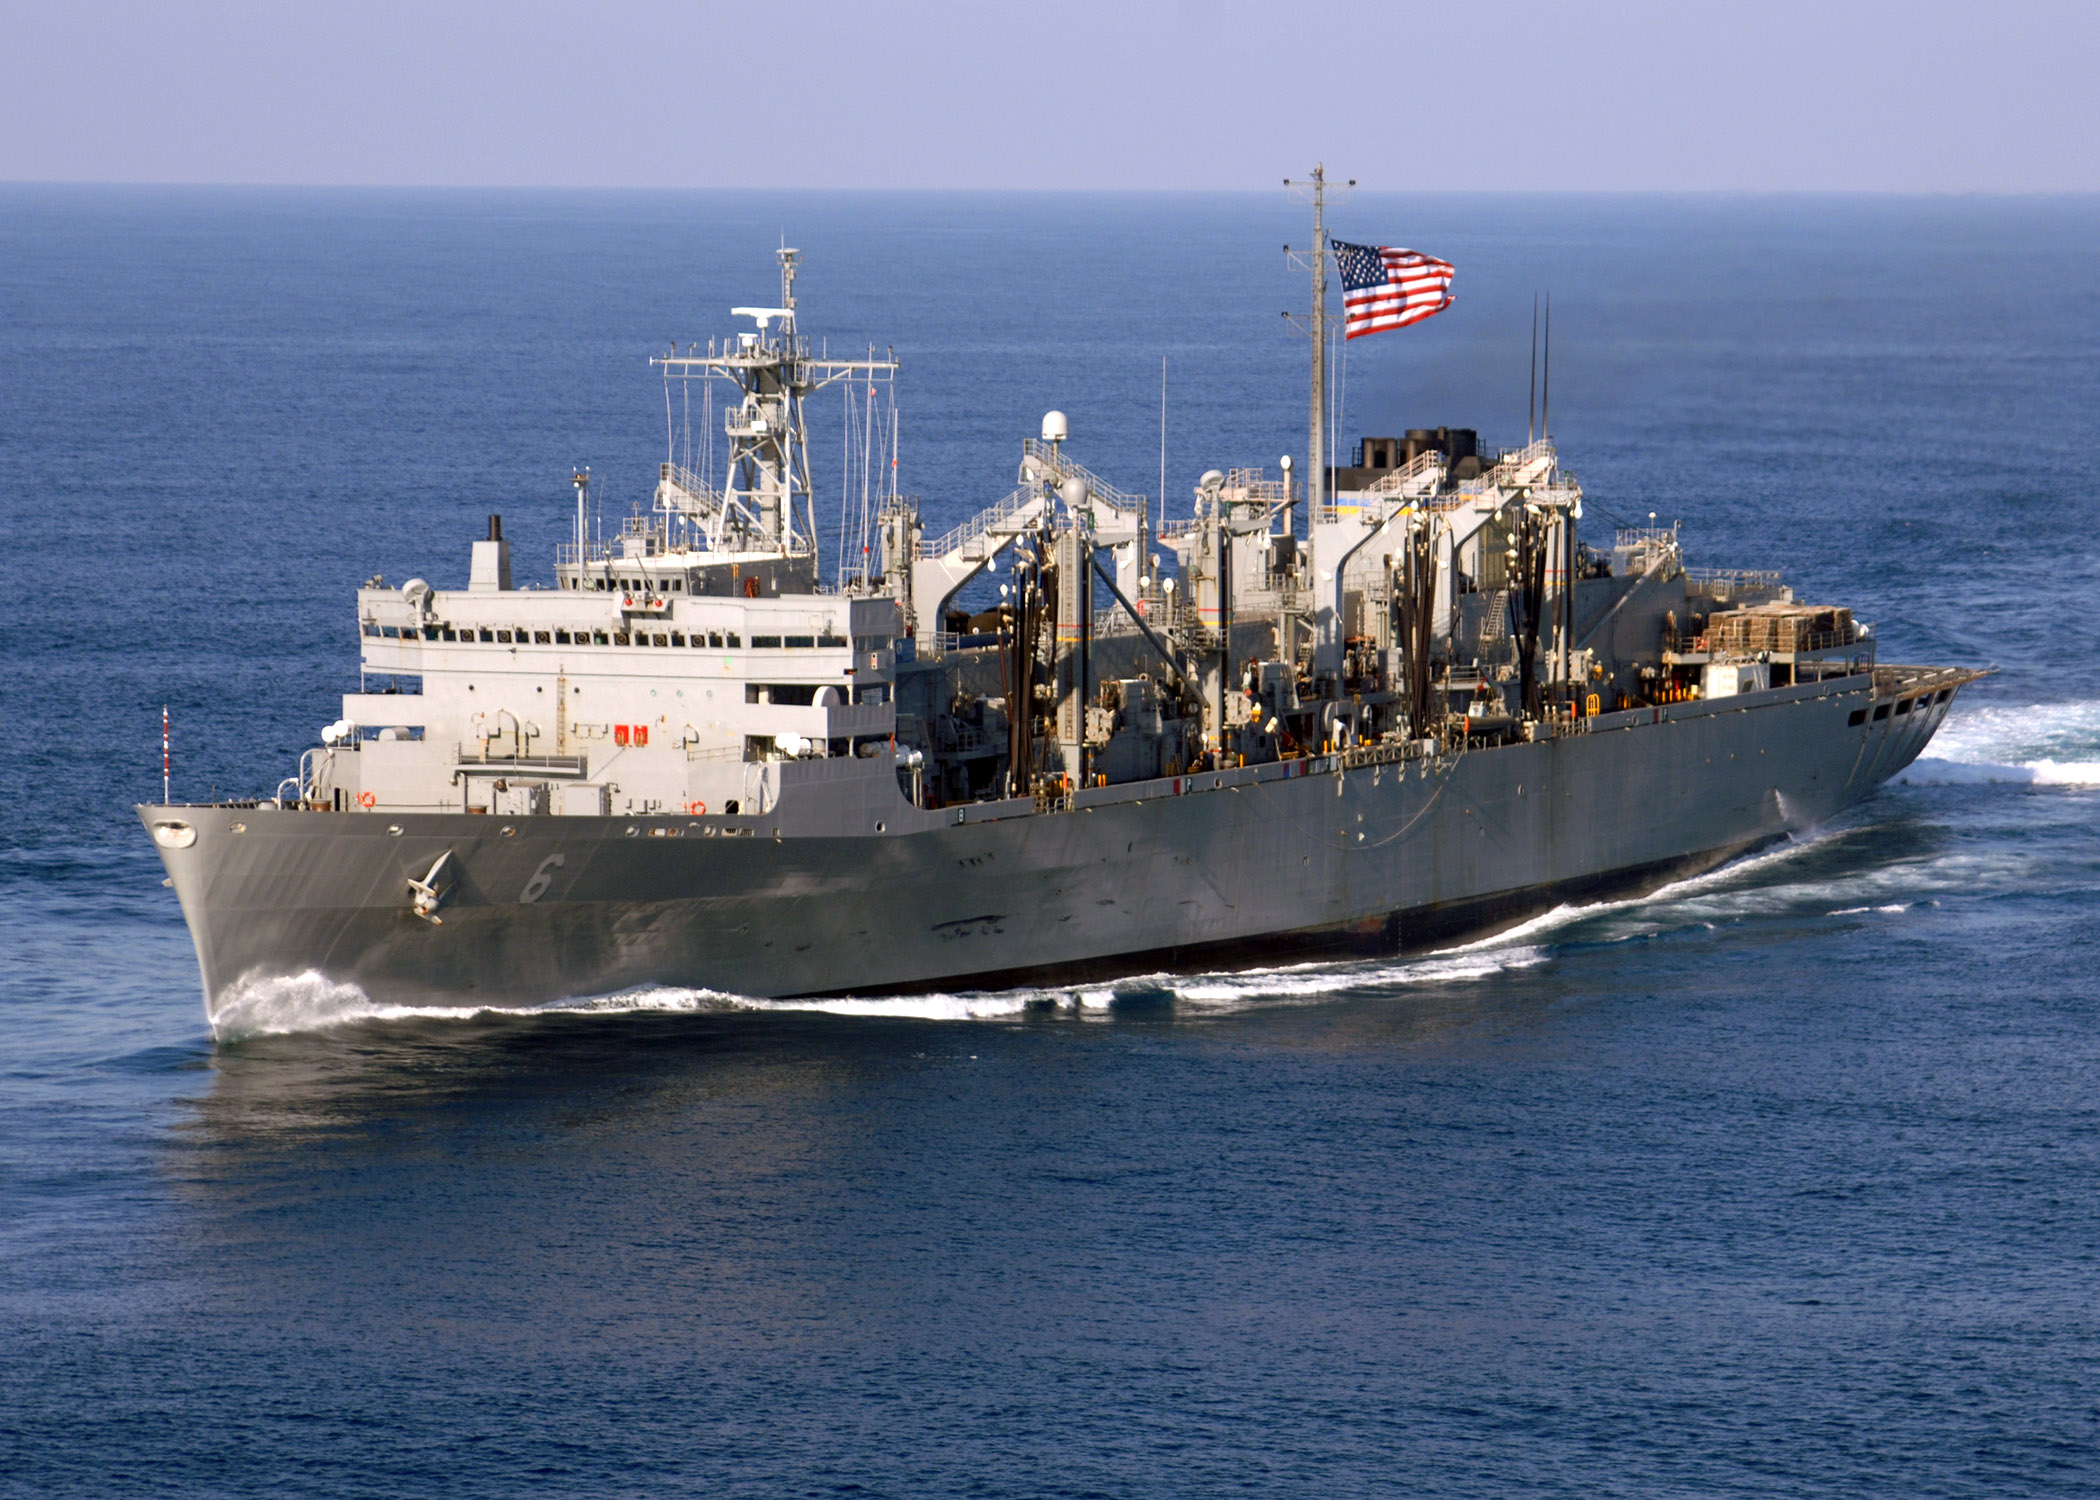 US_Navy_060507-N-7748K-015_The_Military_Sealift_Command_%28MSC%29_fast_combat_support_ship_USNS_Supply_%28T-AOE_6%29_sails_through_the_Atlantic_Ocean_in_formation_with_the_Enterprise_Carrier_Strike_group_%28CSG%29.jpg